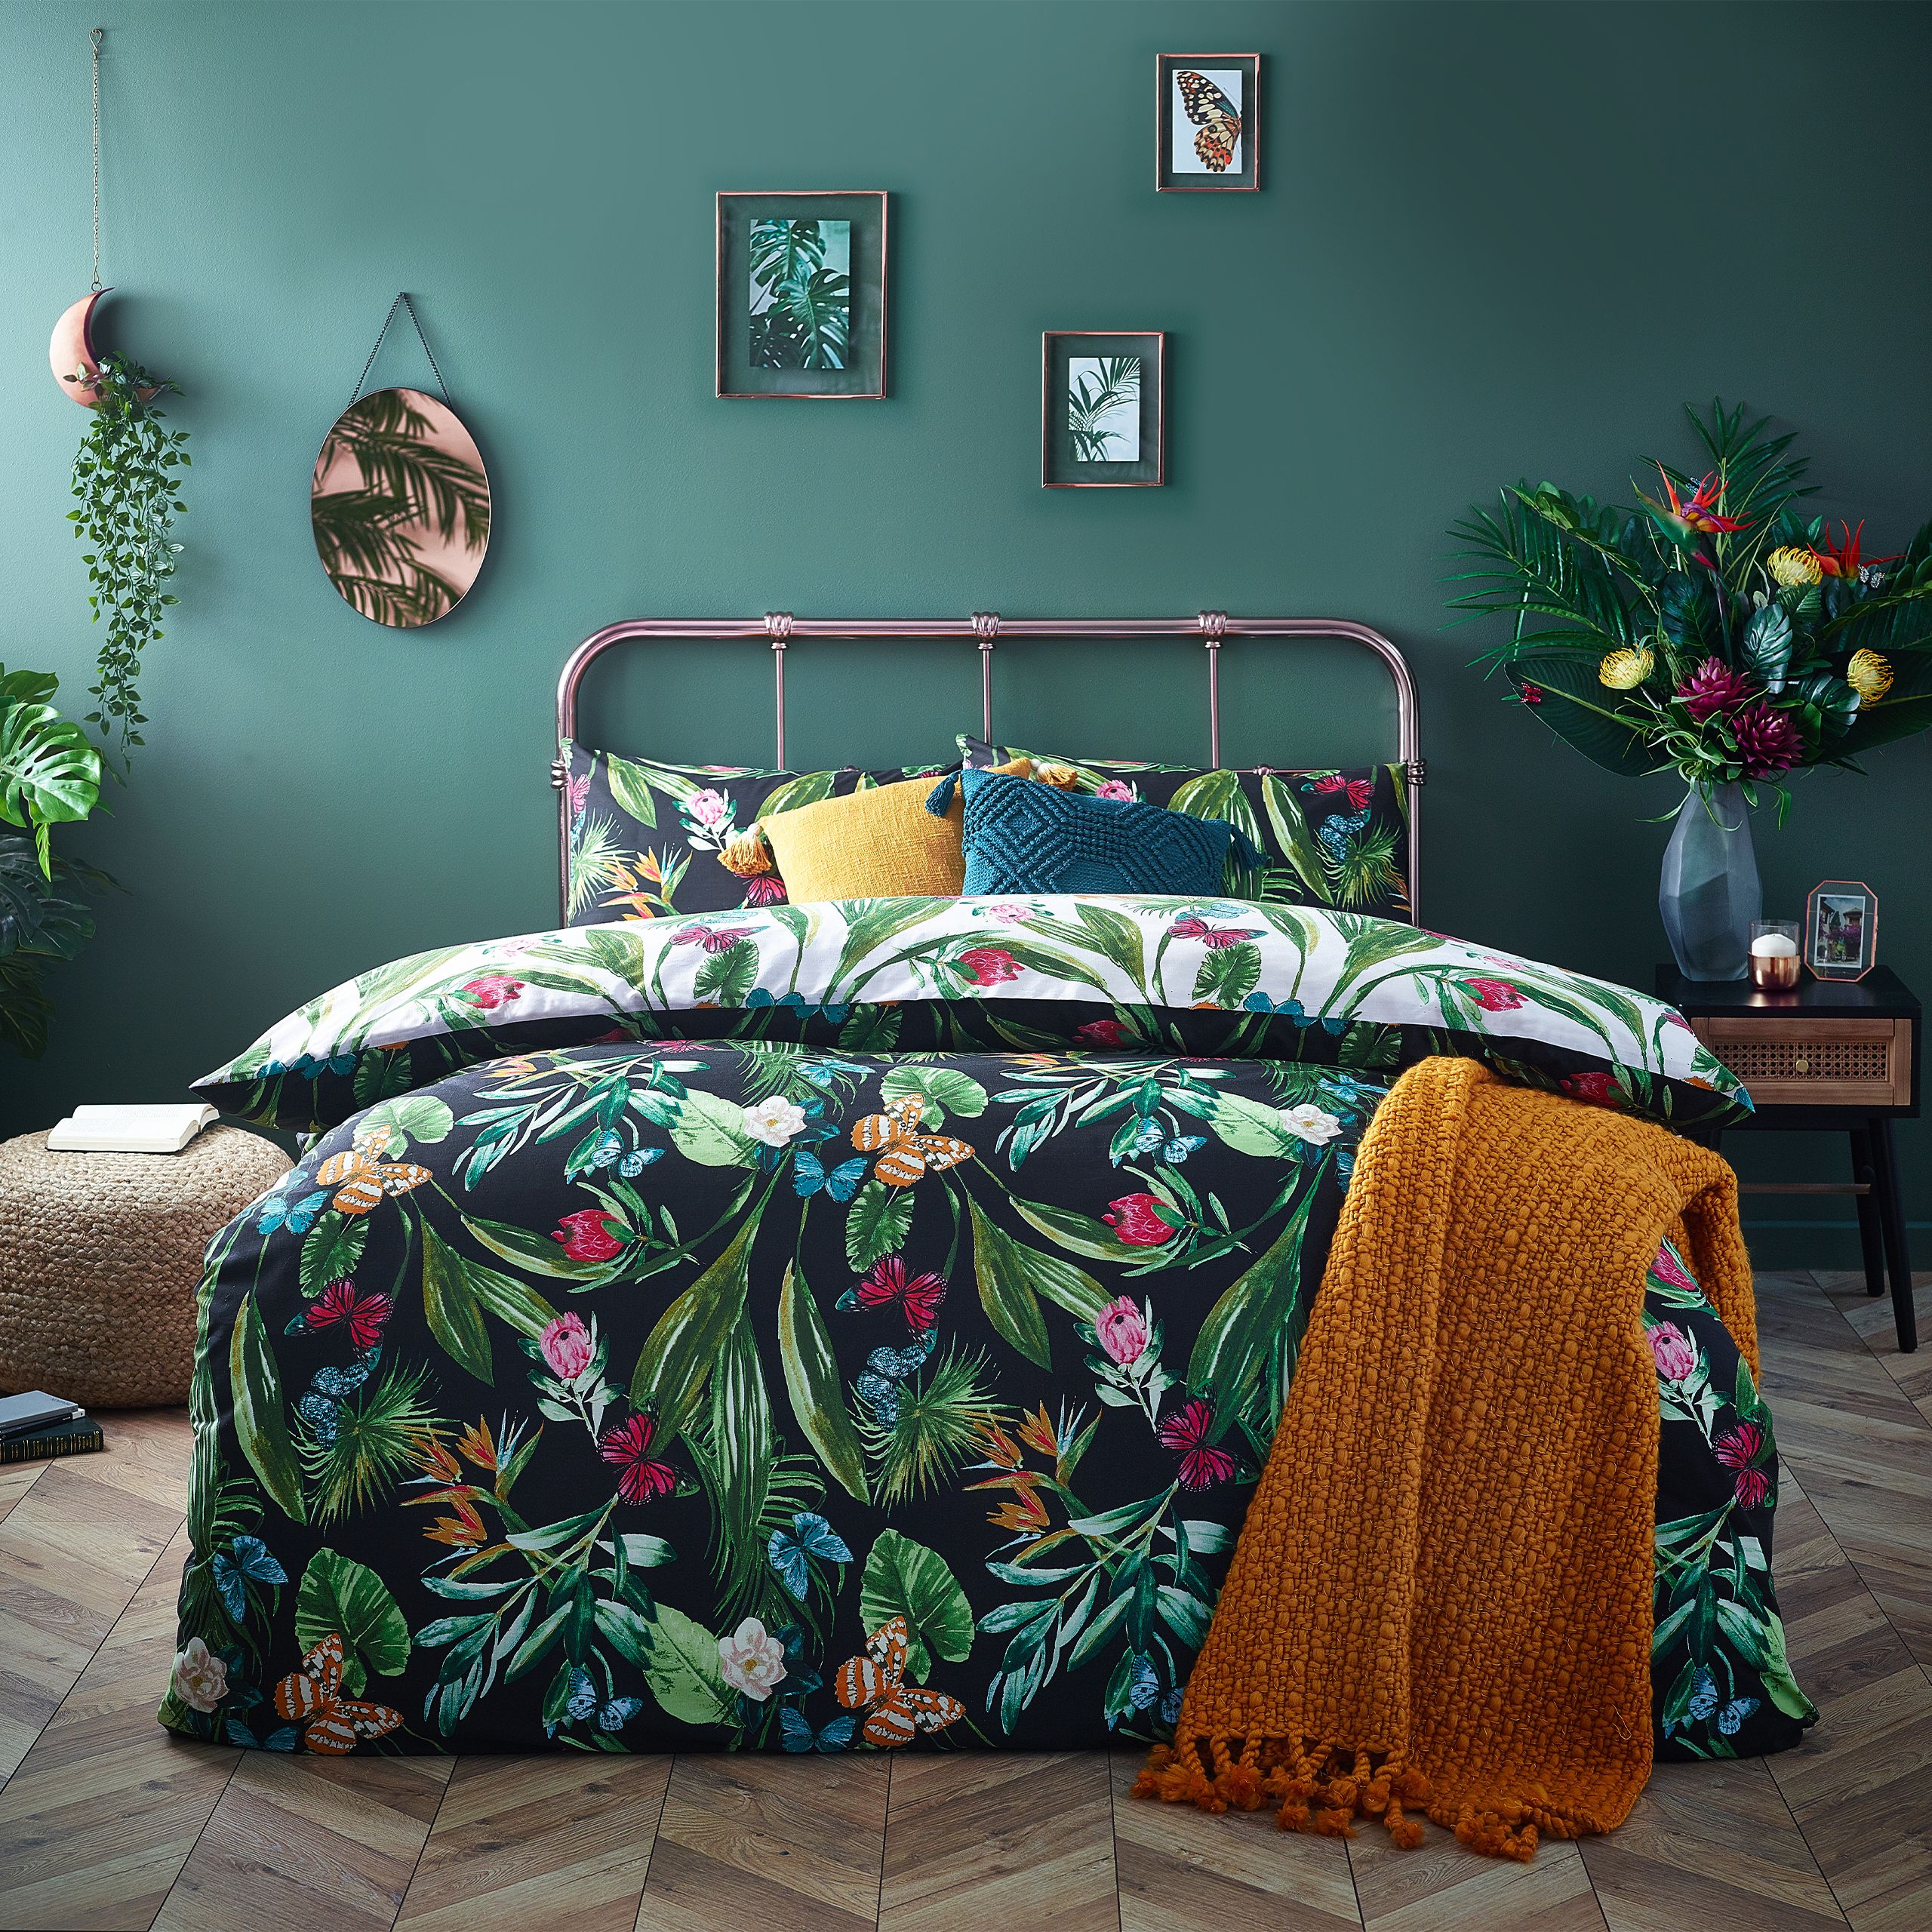 Add a pop of colour to your bedroom with this vibrant botanical duvet cover. The bright butterflies flutter onto the reverse against a neutral base so you can switch the look when you need to.